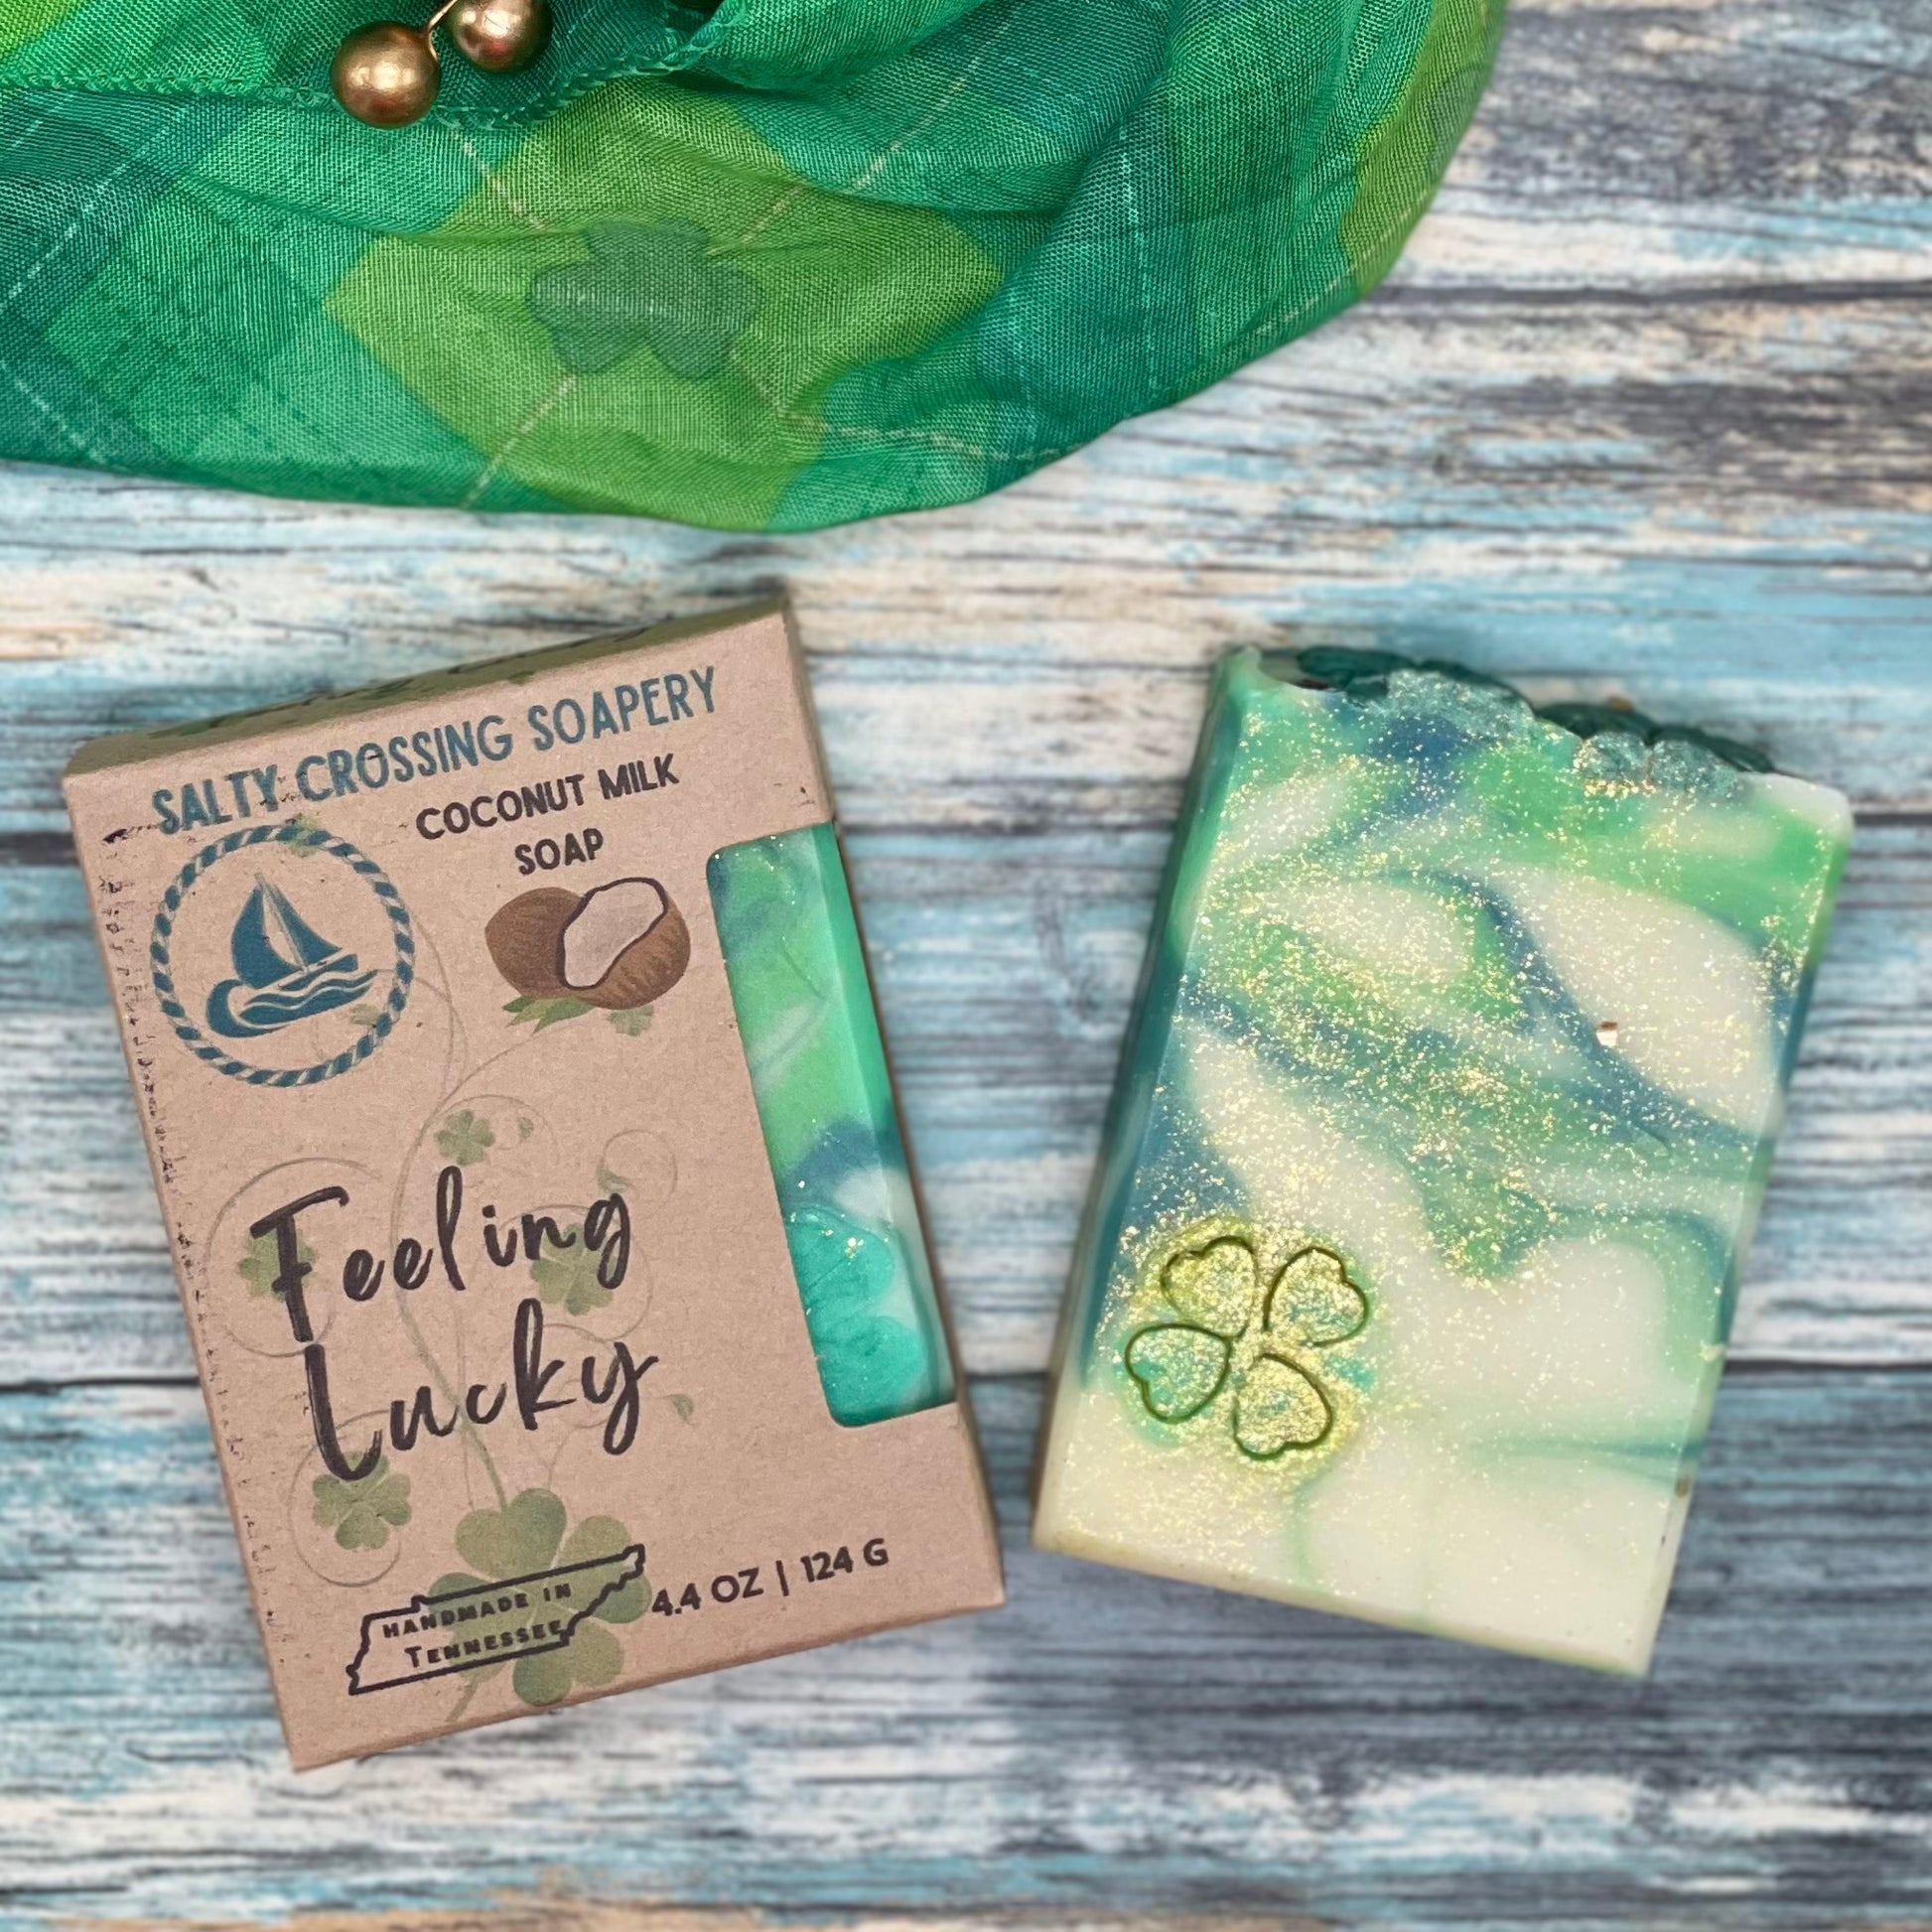 Feeling lucky soap bar and box. The bar is swirled with 2 shades of green plus white. There’s a 4 leaf clover stamp on the face, with lots of gold dust sparkles. The box is kraft paperboard with color text and graphics.